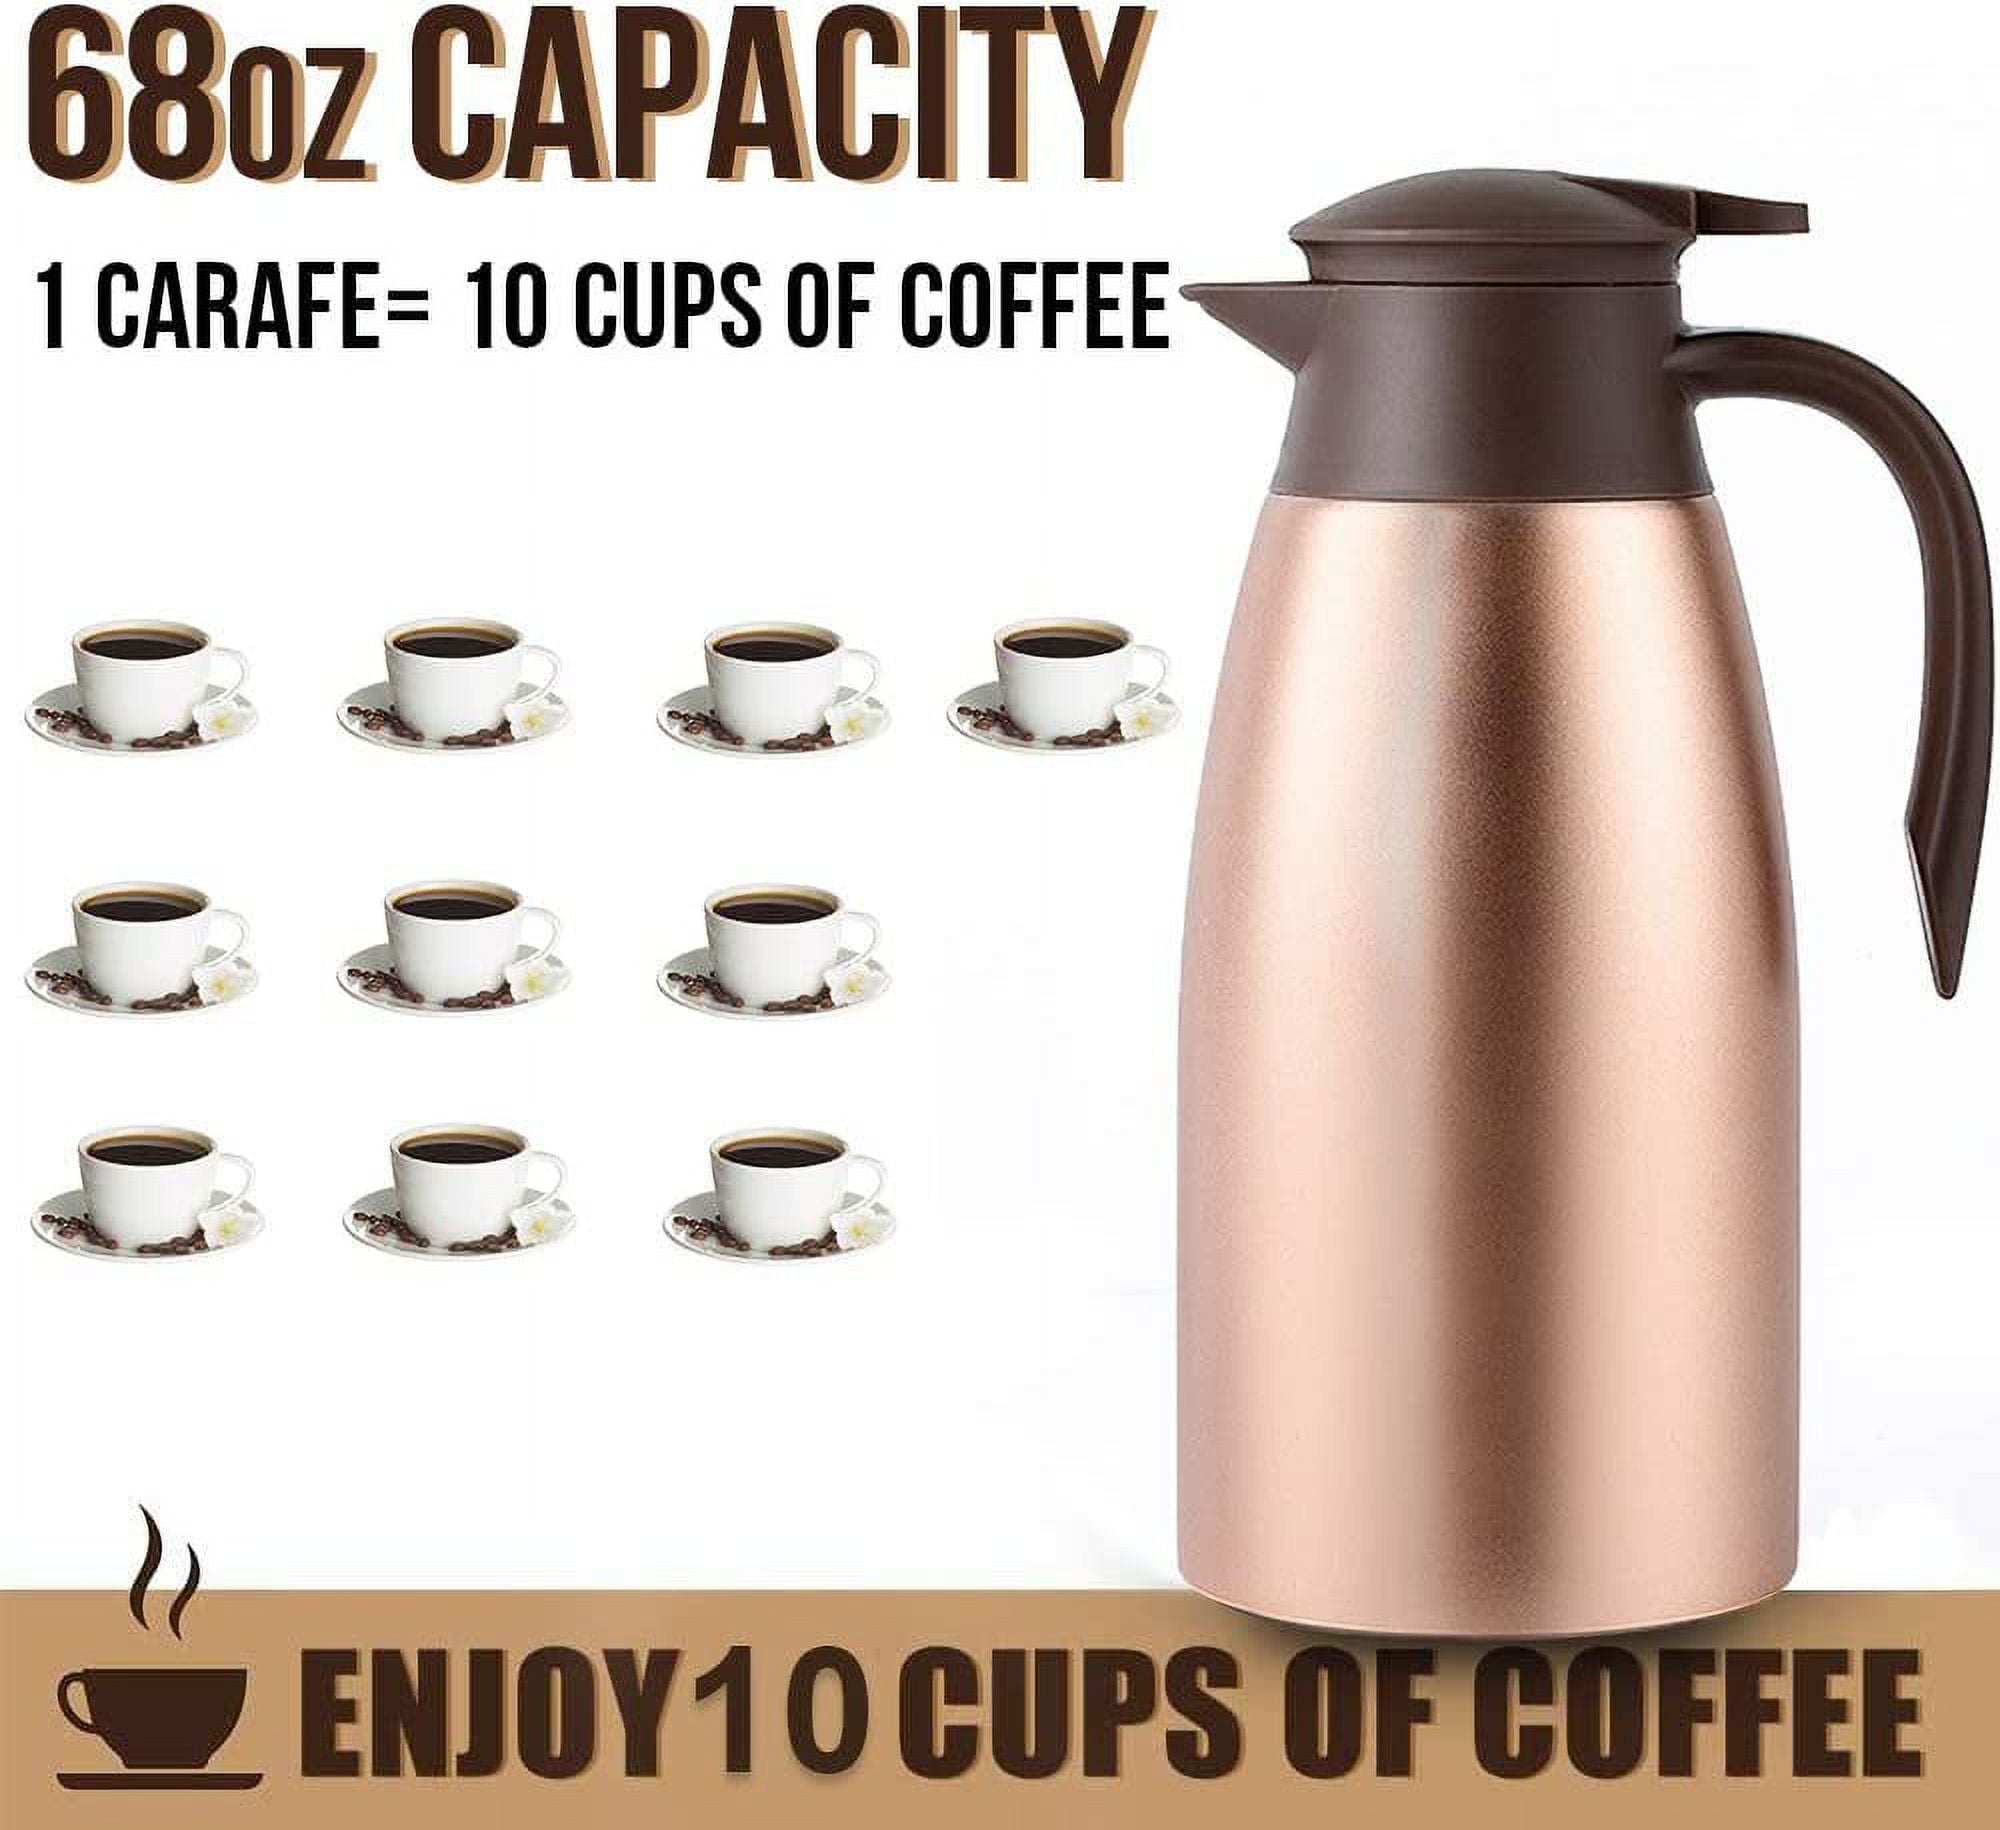 Thermal Coffee Carafe Stainless Steel - Heavy Duty, 24hr Lab Tested Heat  Retention, 2 Liter 68oz Insulated Coffee Thermos, Water & Beverage  Dispenser